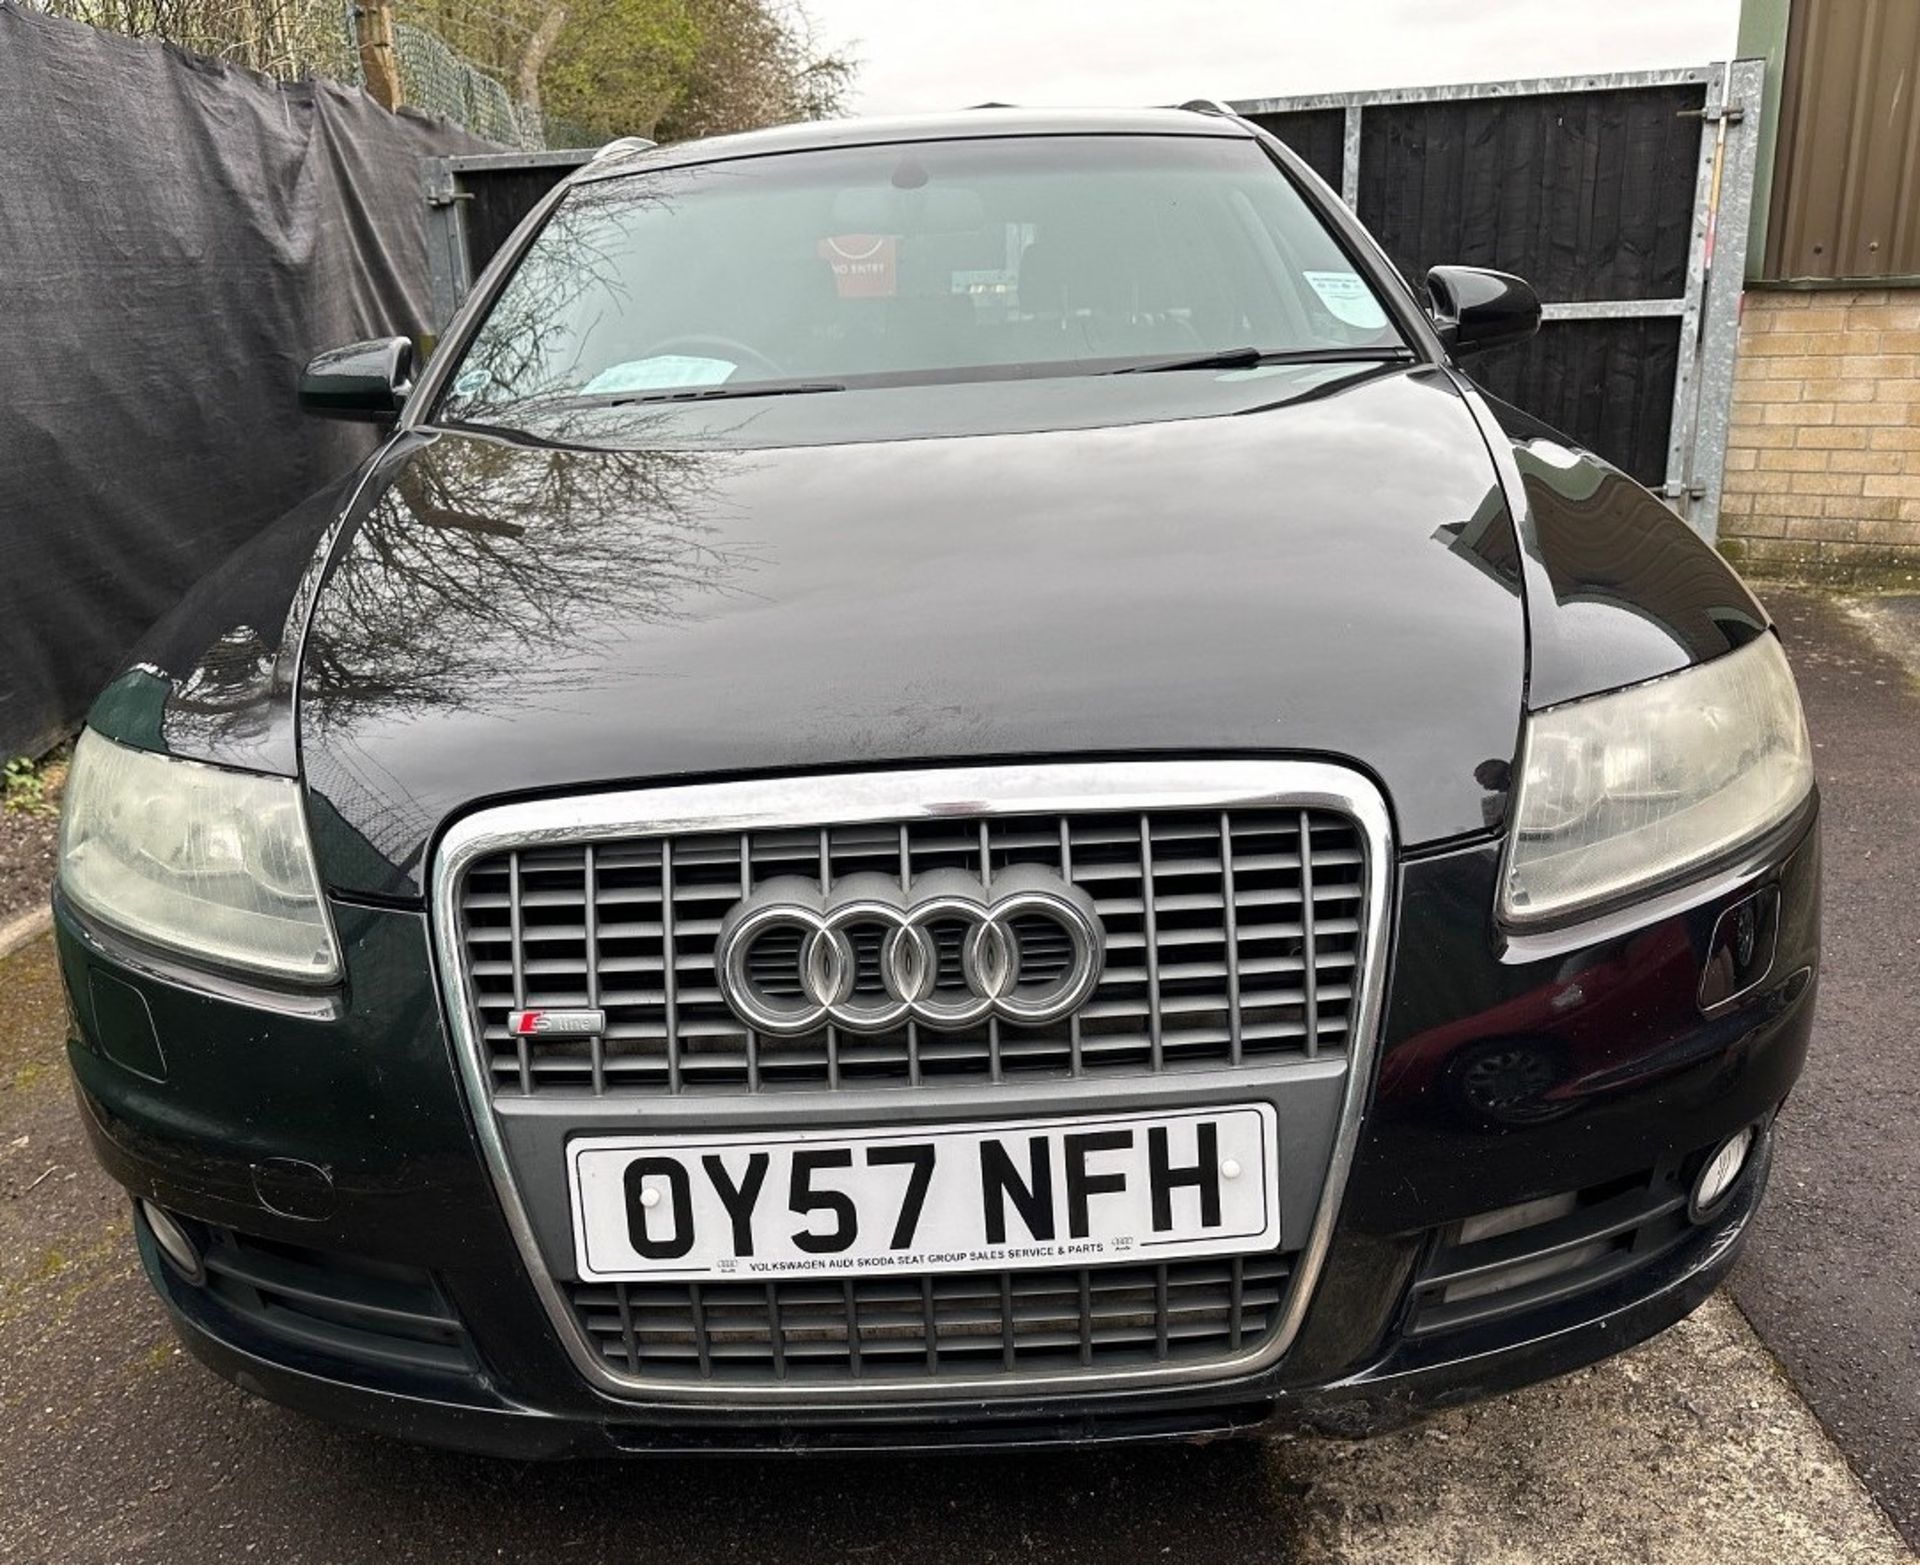 2007 Audi A6 Avant 2.7 TDi Registration number OY57 NFH Chassis number WAUZZZ4F58N016755 Engine